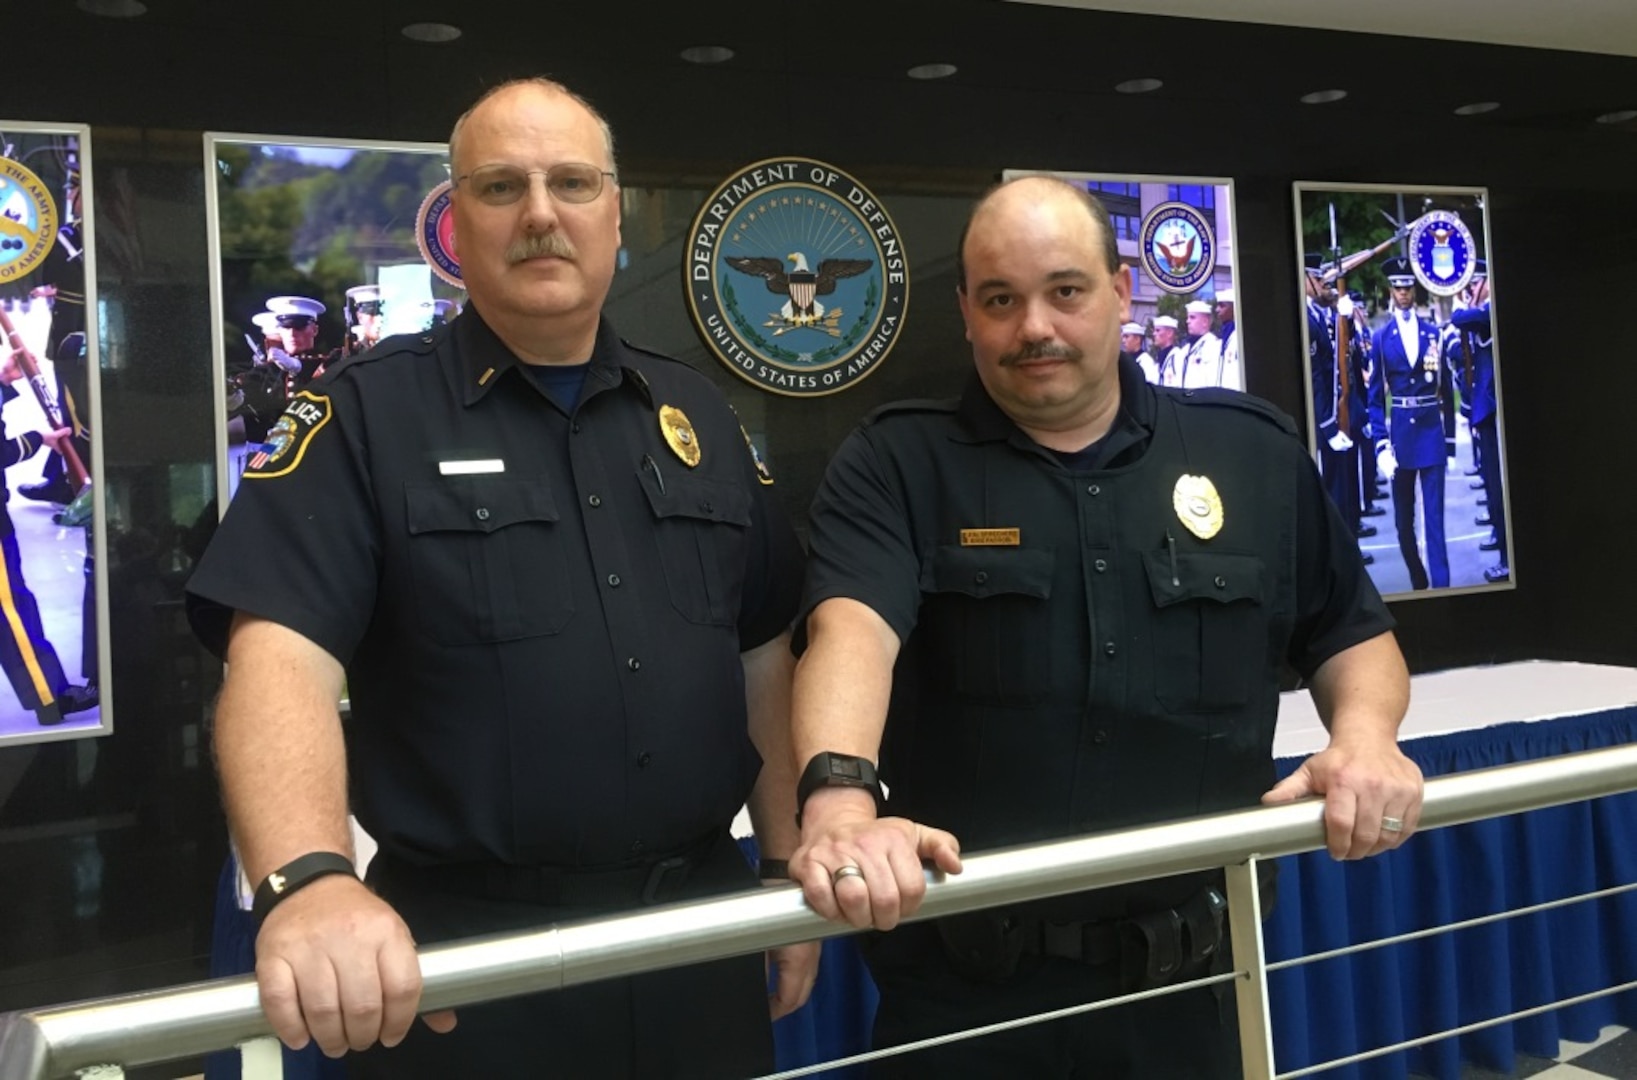 DLA Police Lt. James Haaf (left) and Staff Sgt. James Sprecher participated in the Law Enforcement United "Road to Hope Memorial Bicycle Ride” May 10-12, during National Police Week 2016.